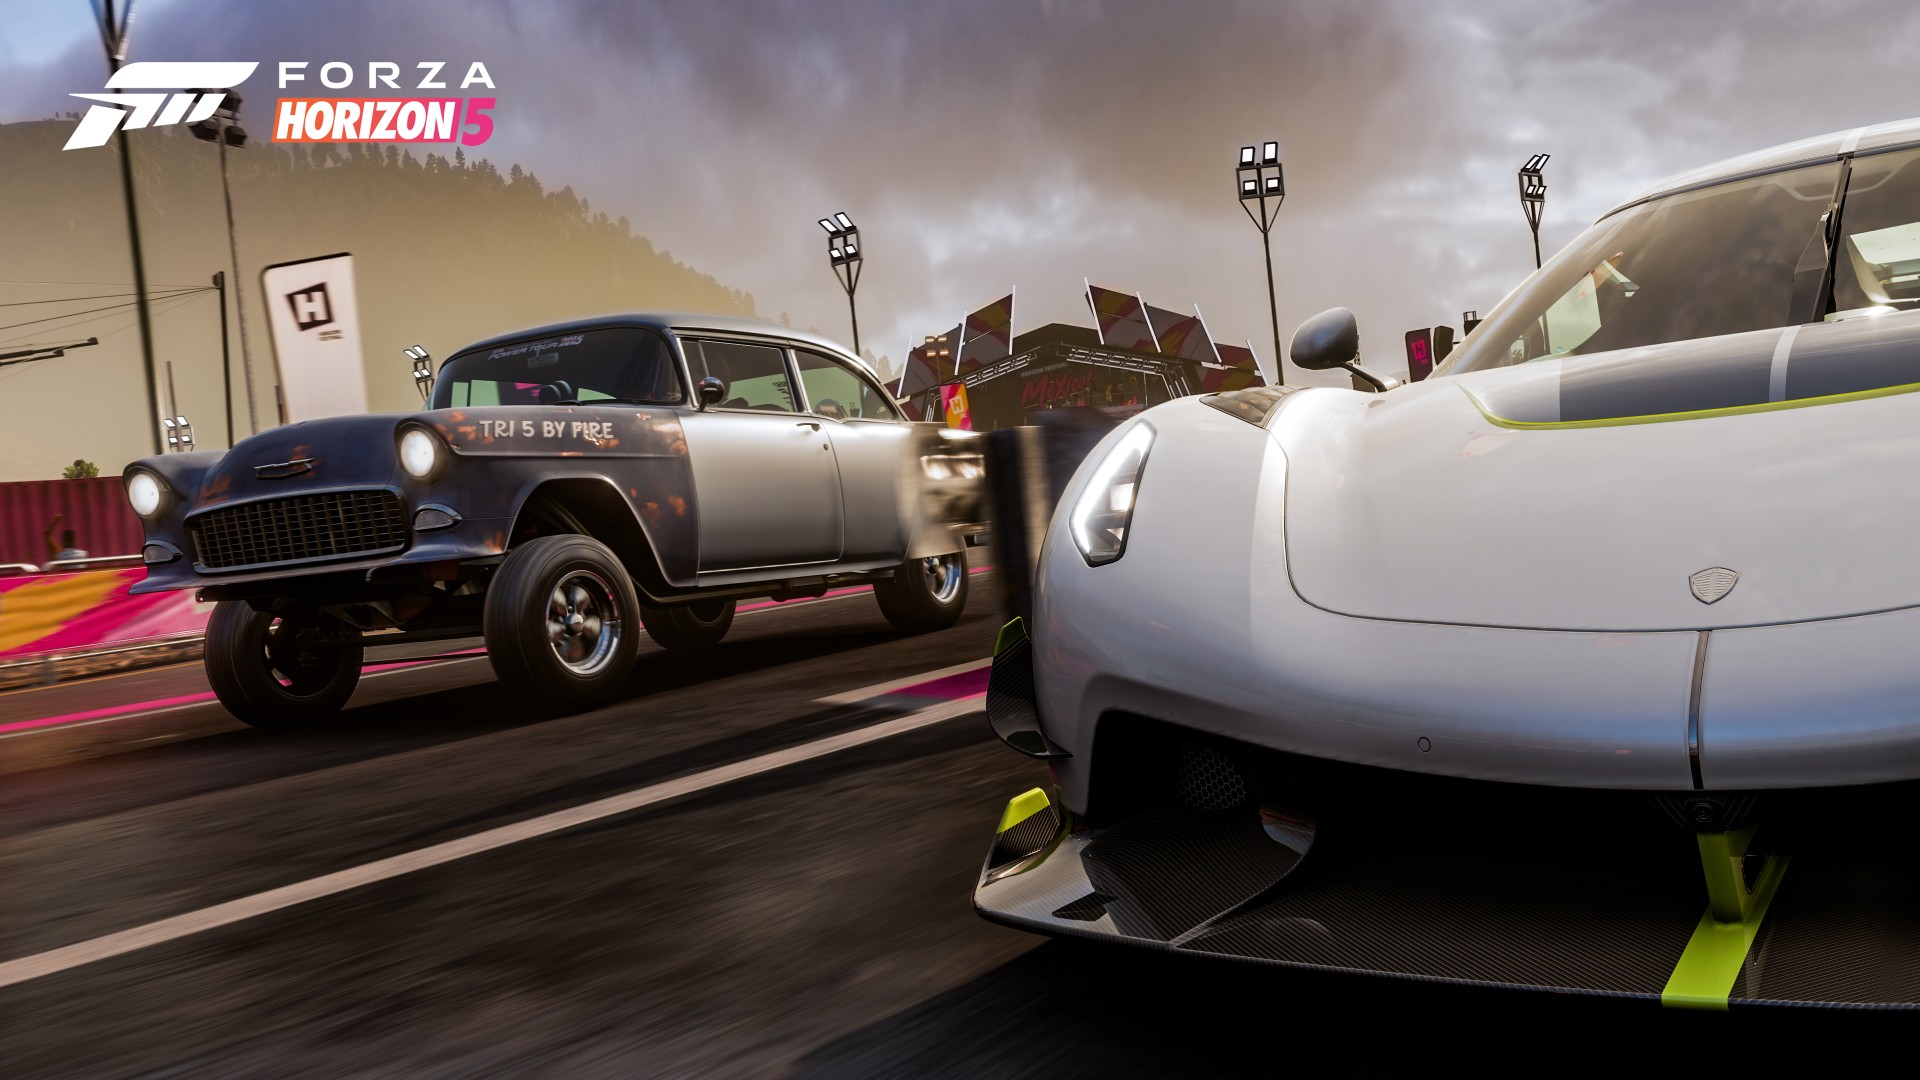 Preload Forza Horizon 5 in Early Access Today